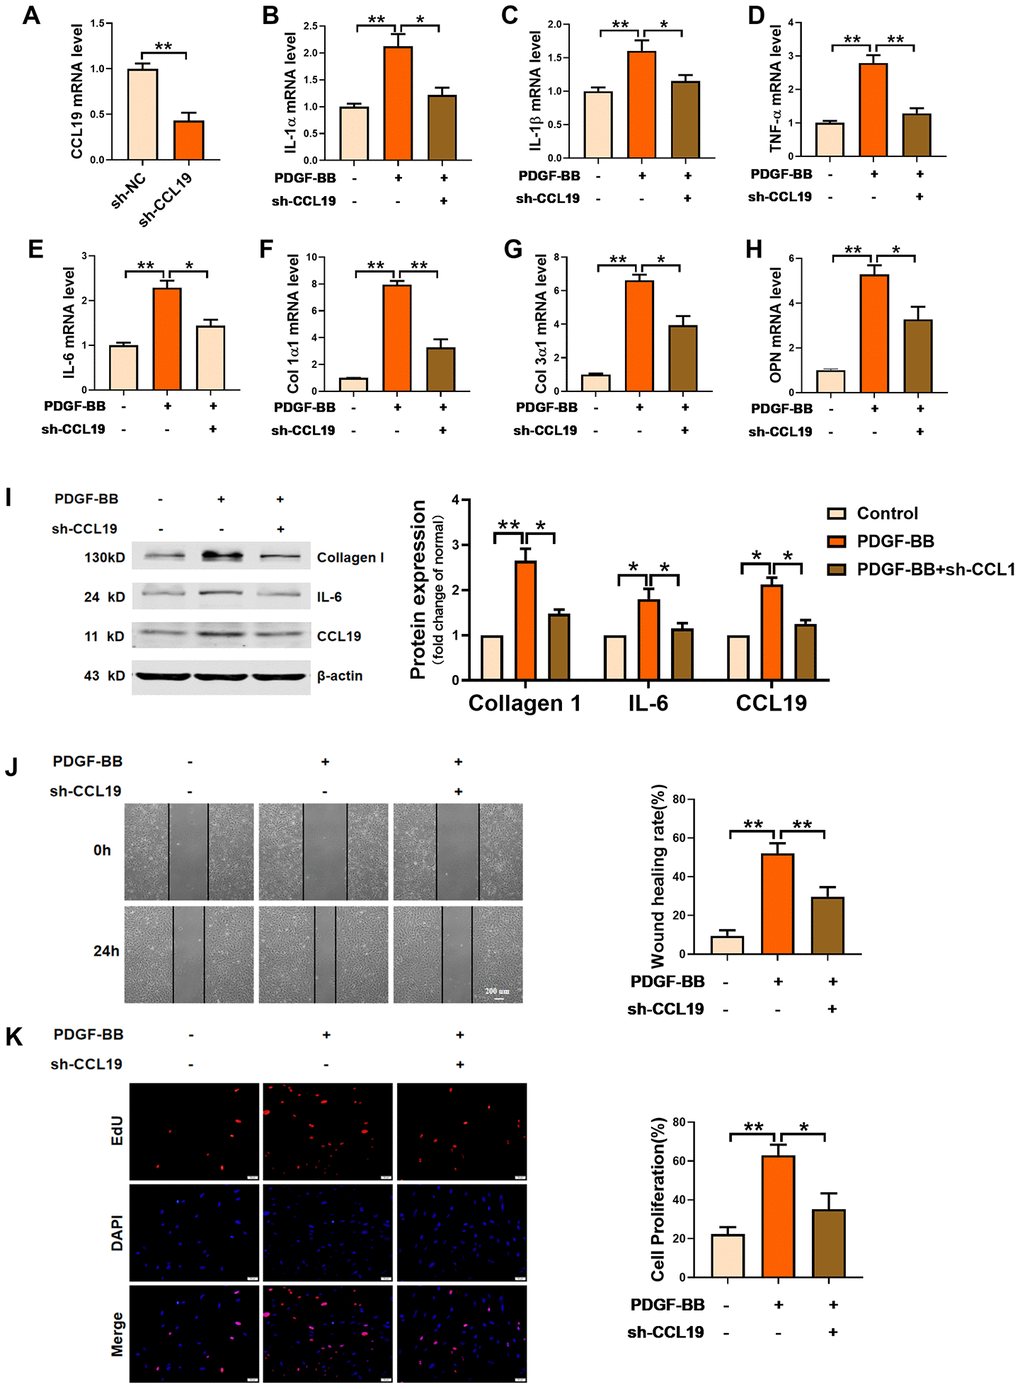 Effects of silencing CCL19 on VSMCS. Detection of silencing efficiency of sh-CCL19 plasmid was detected by qRT-PCR. (A) Knockdown of CCL19 inhibited mRNA level of IL1-α (B), IL-1β (C), TNF-α (D), IL-6 (E) and collagen1 (F), collagen3 (G) and OPN (H) induced by PDGF-BB.n=5 (I) Western blot show collagen1 and IL-6 protein expression. n = 4. Migration (J) and proliferation (K) of VSMCS after silencing CCL19. n = 6. *P